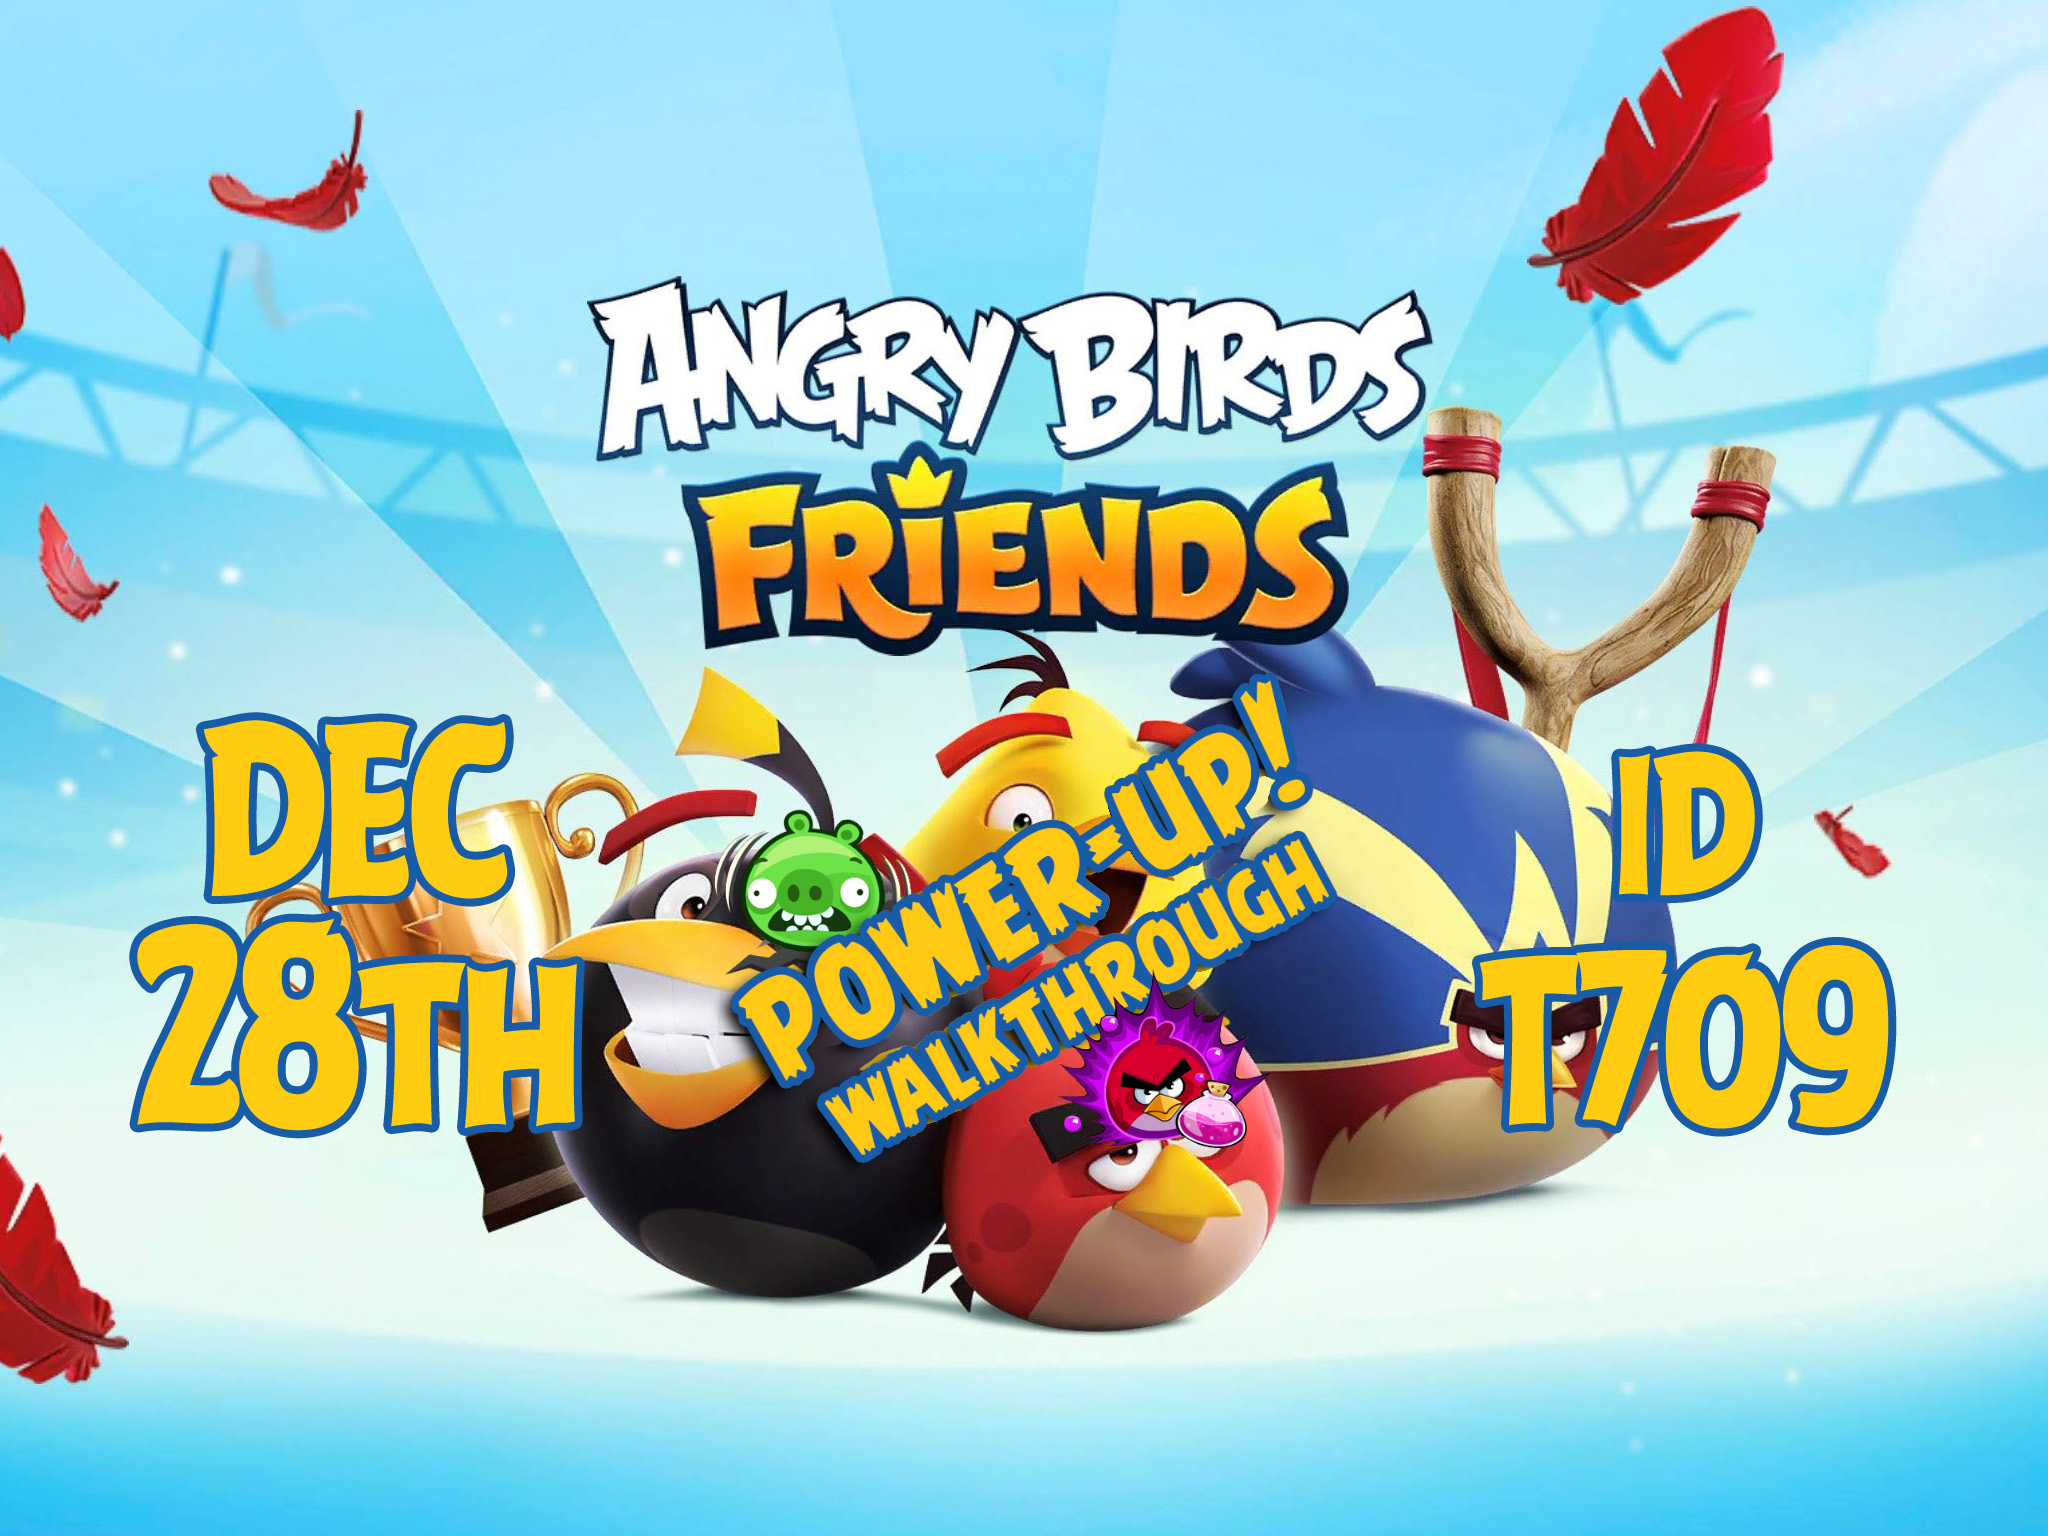 Angry-Birds-Friends-Tournament-T709-Feature-Image-PU